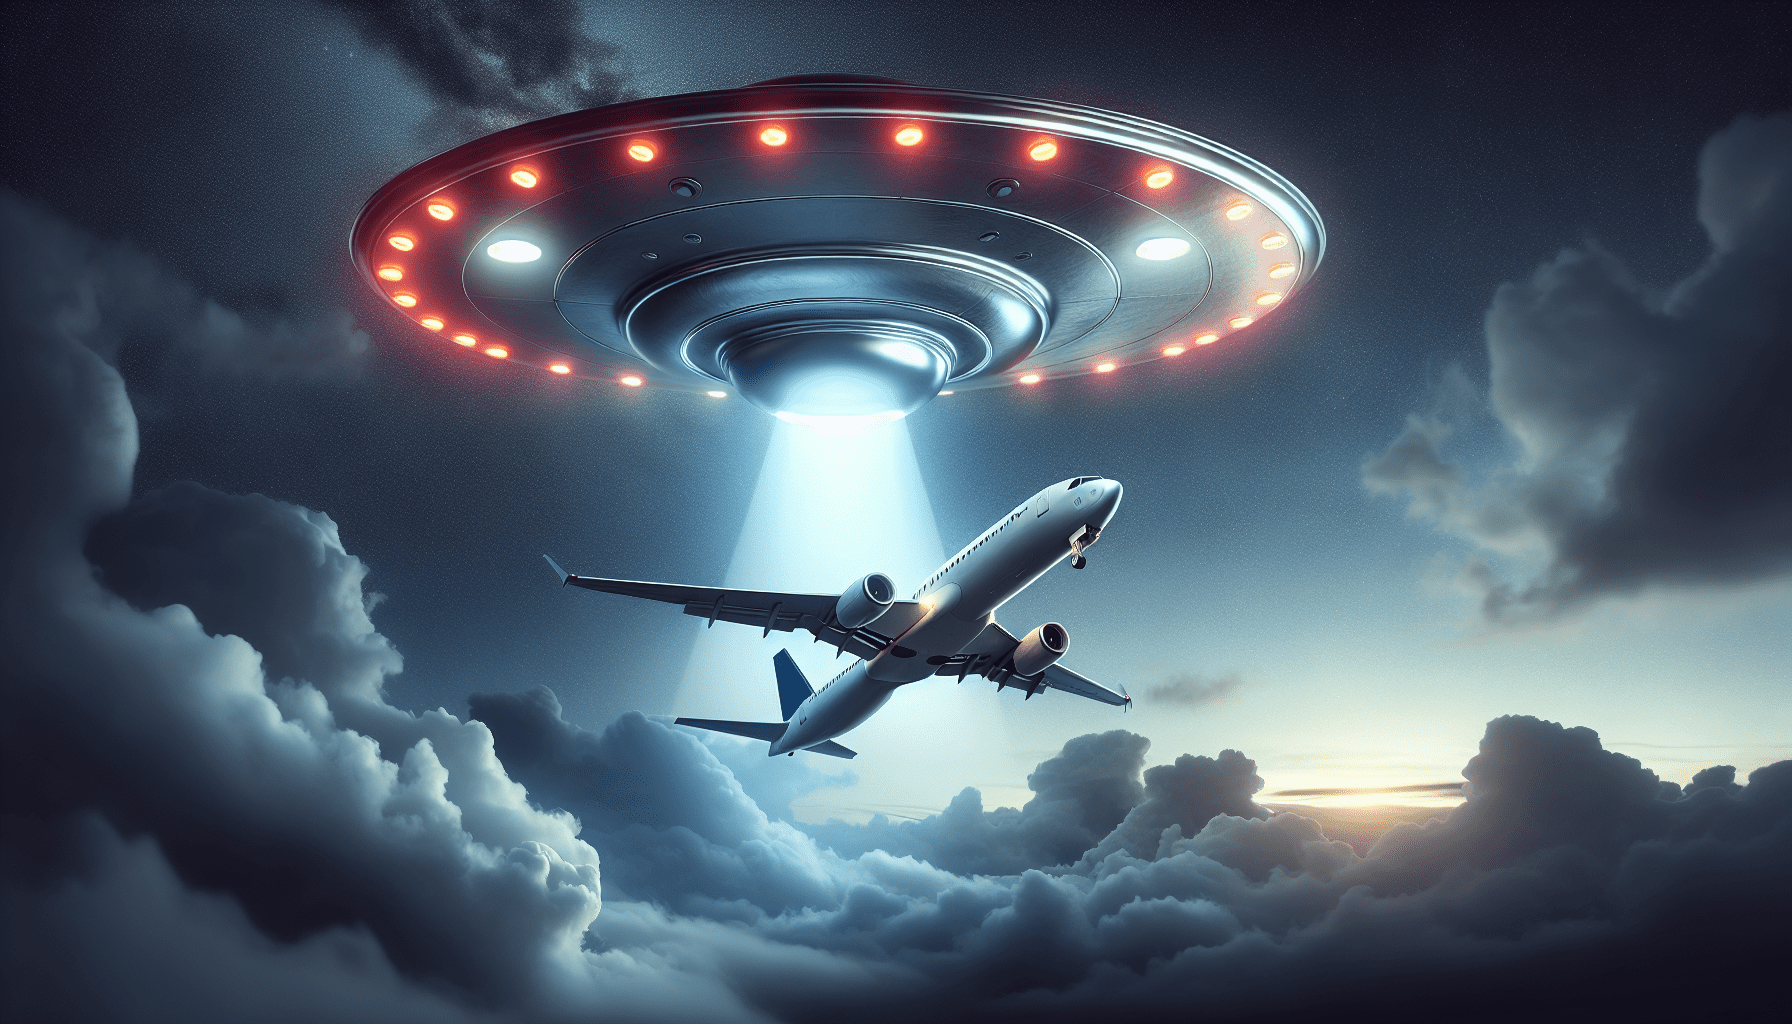 How To Differentiate Between UFOs And Airplanes?